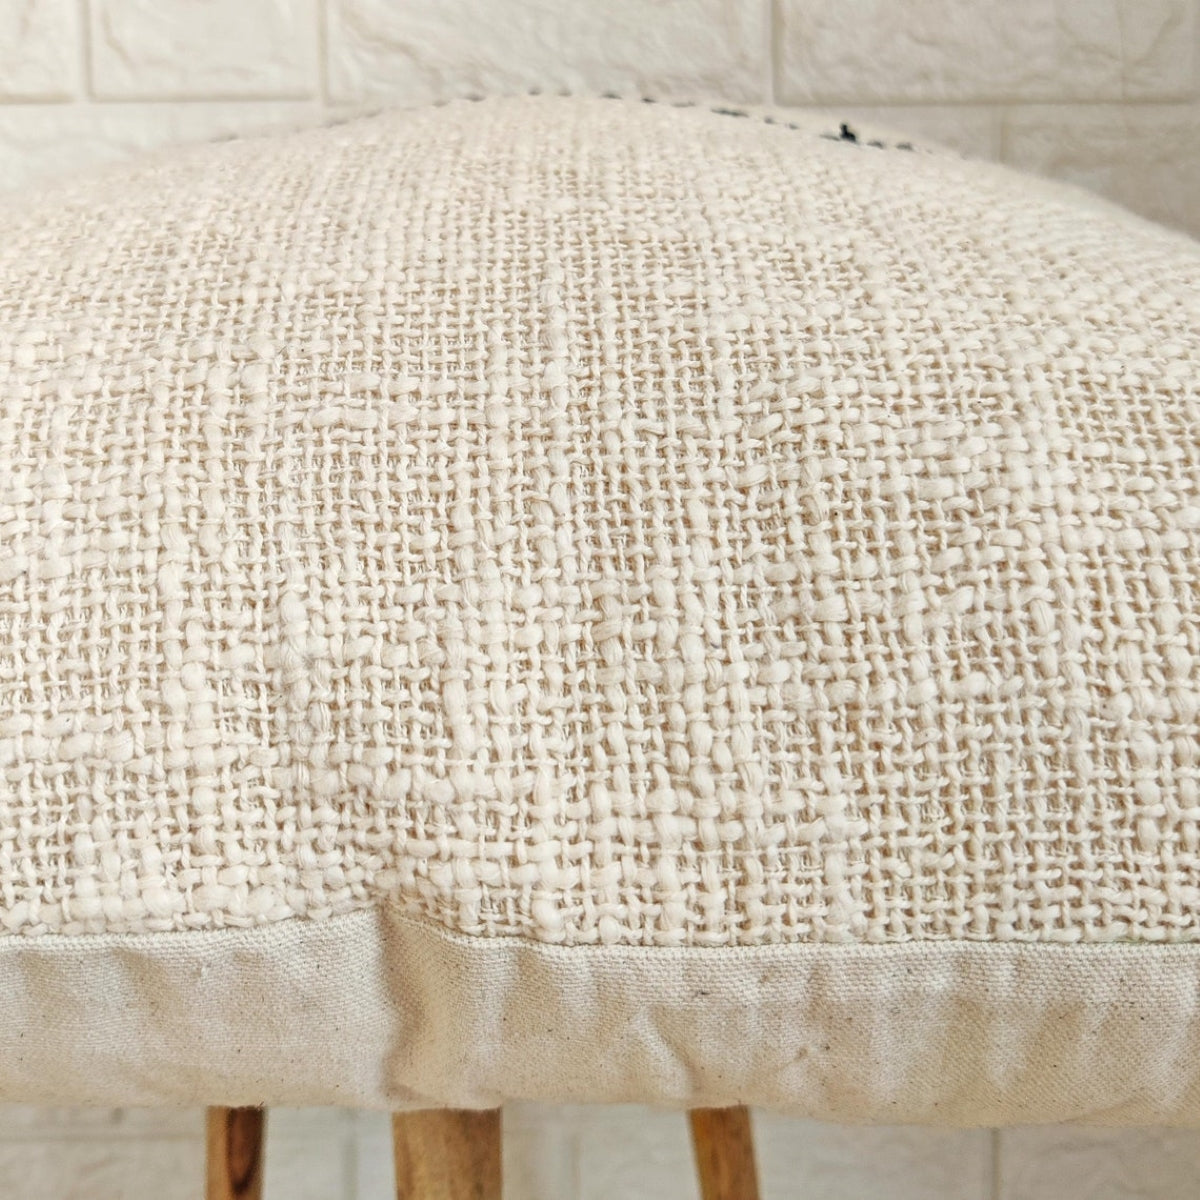 Ivory & Black Kantha Textured Cotton Cushion Cover